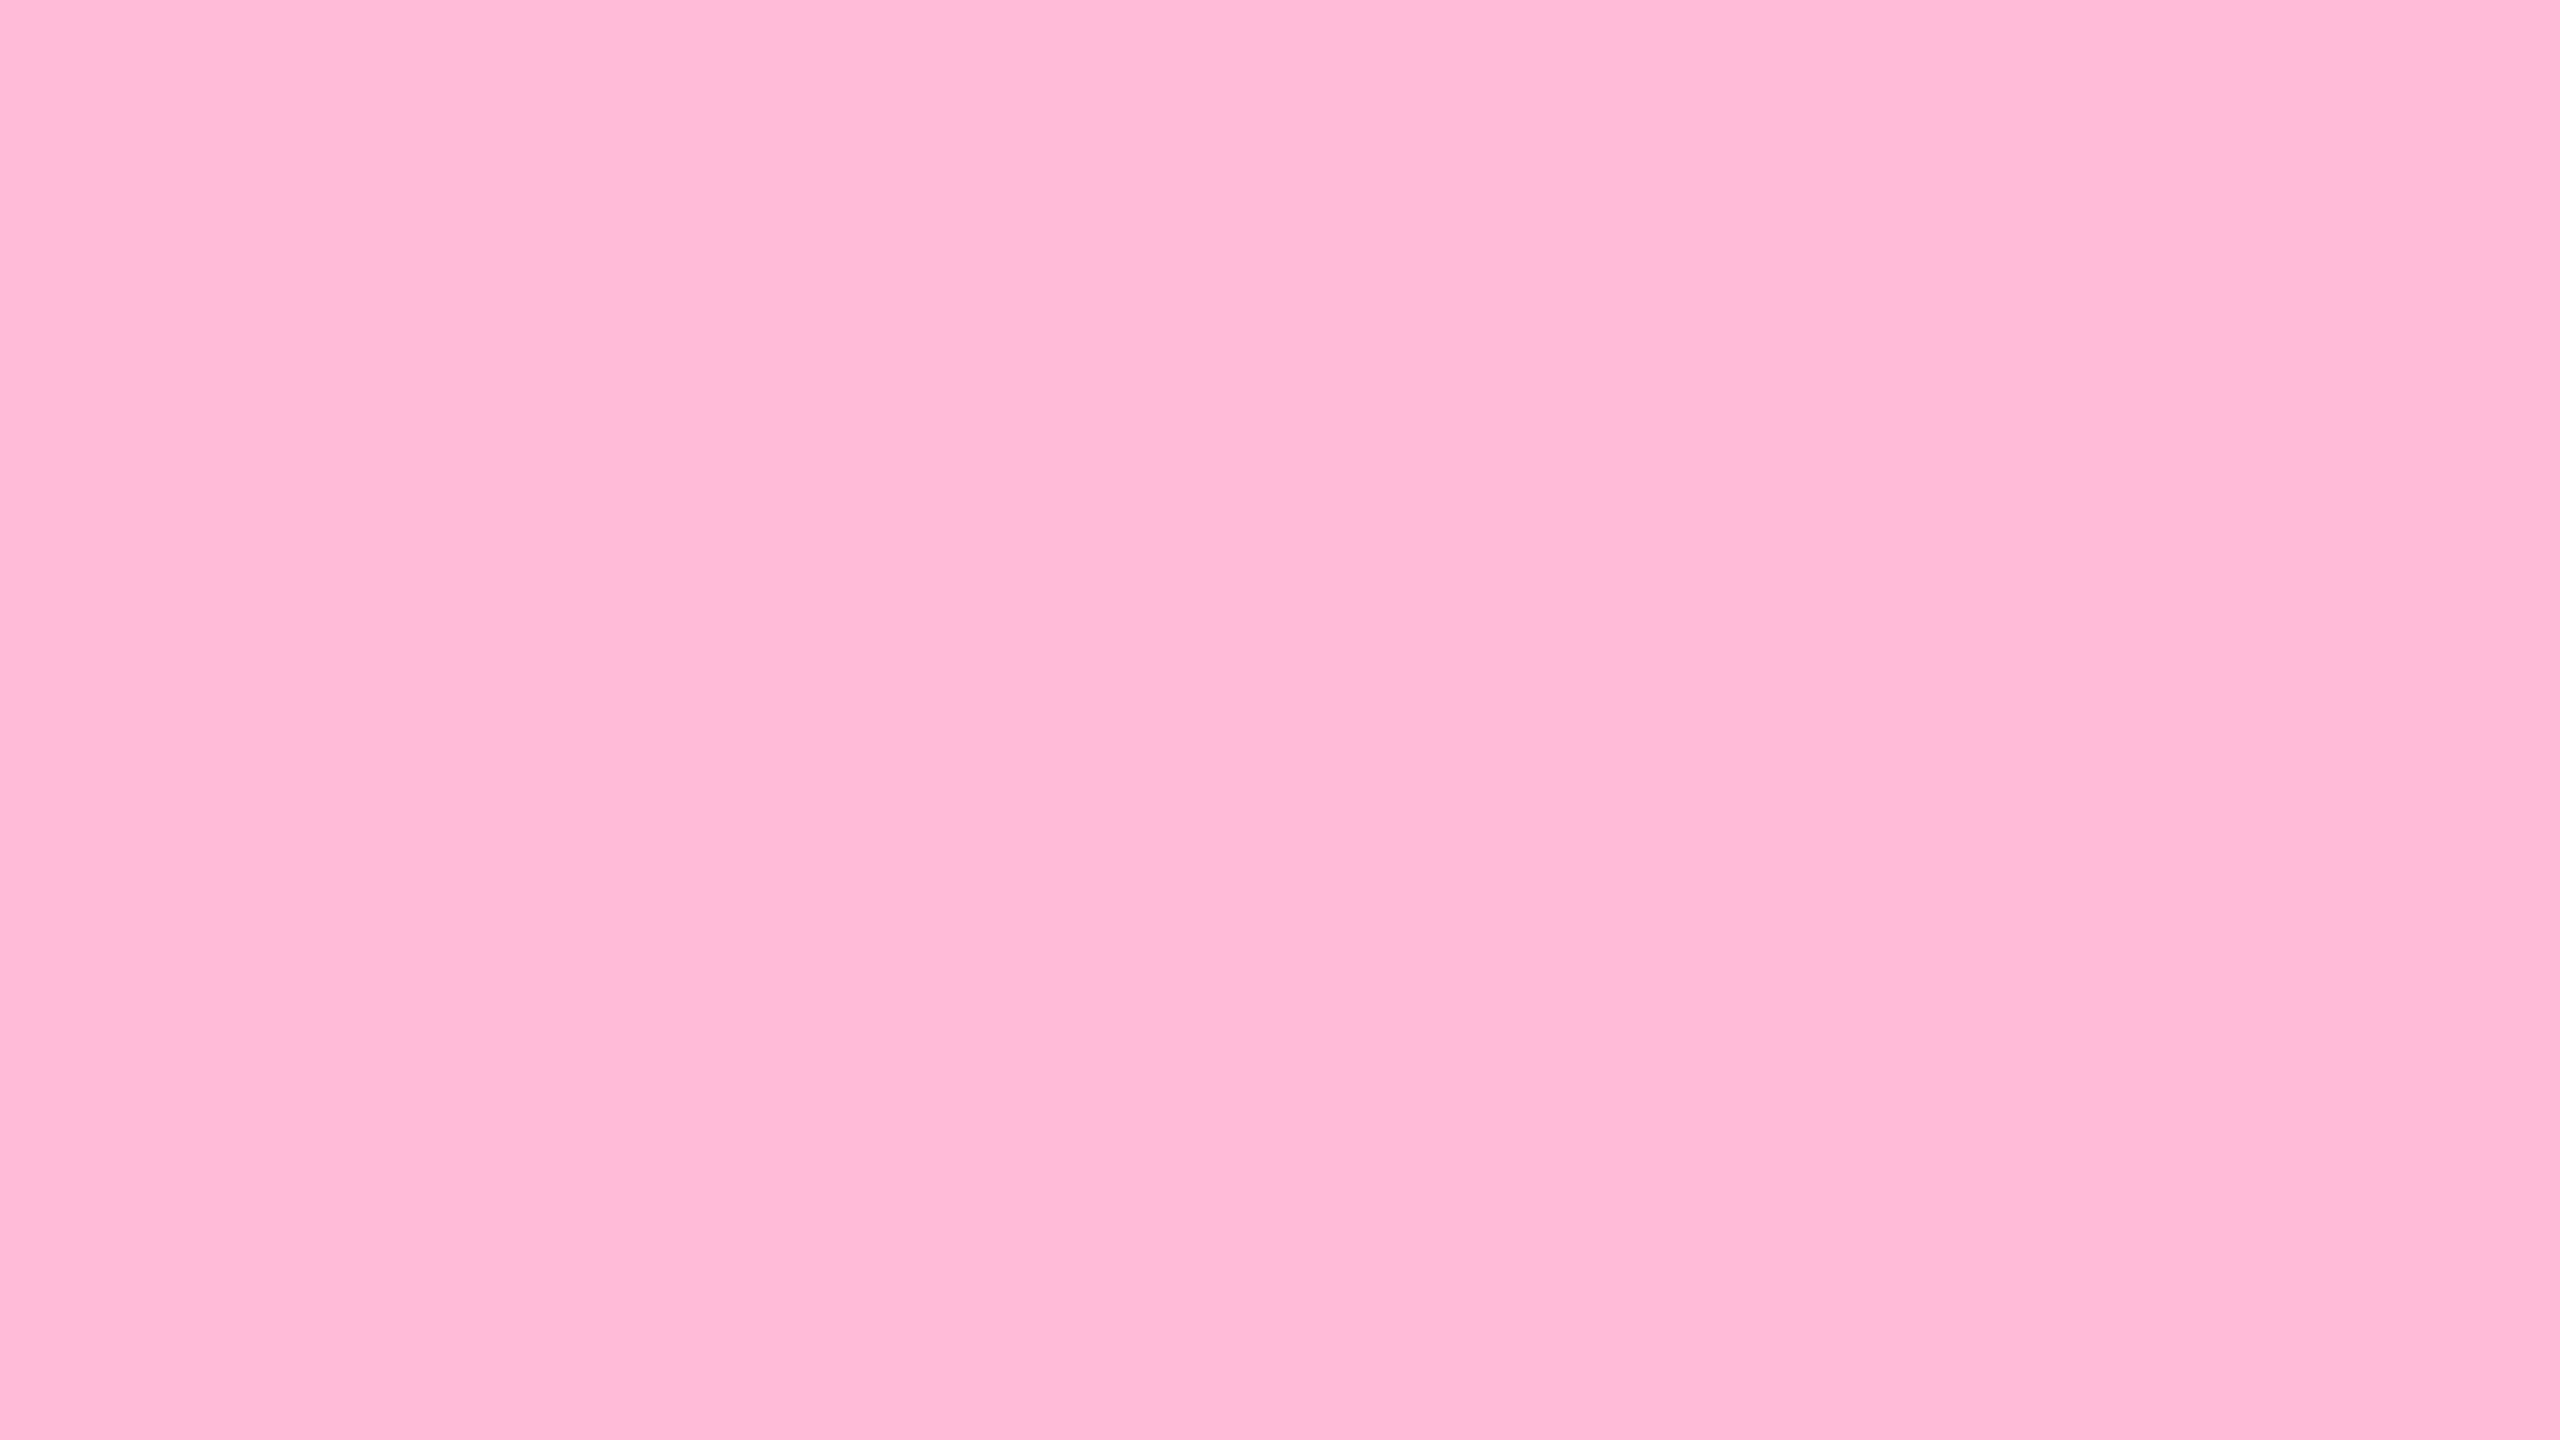 Free 2560x1440 resolution Cotton Candy solid color background view